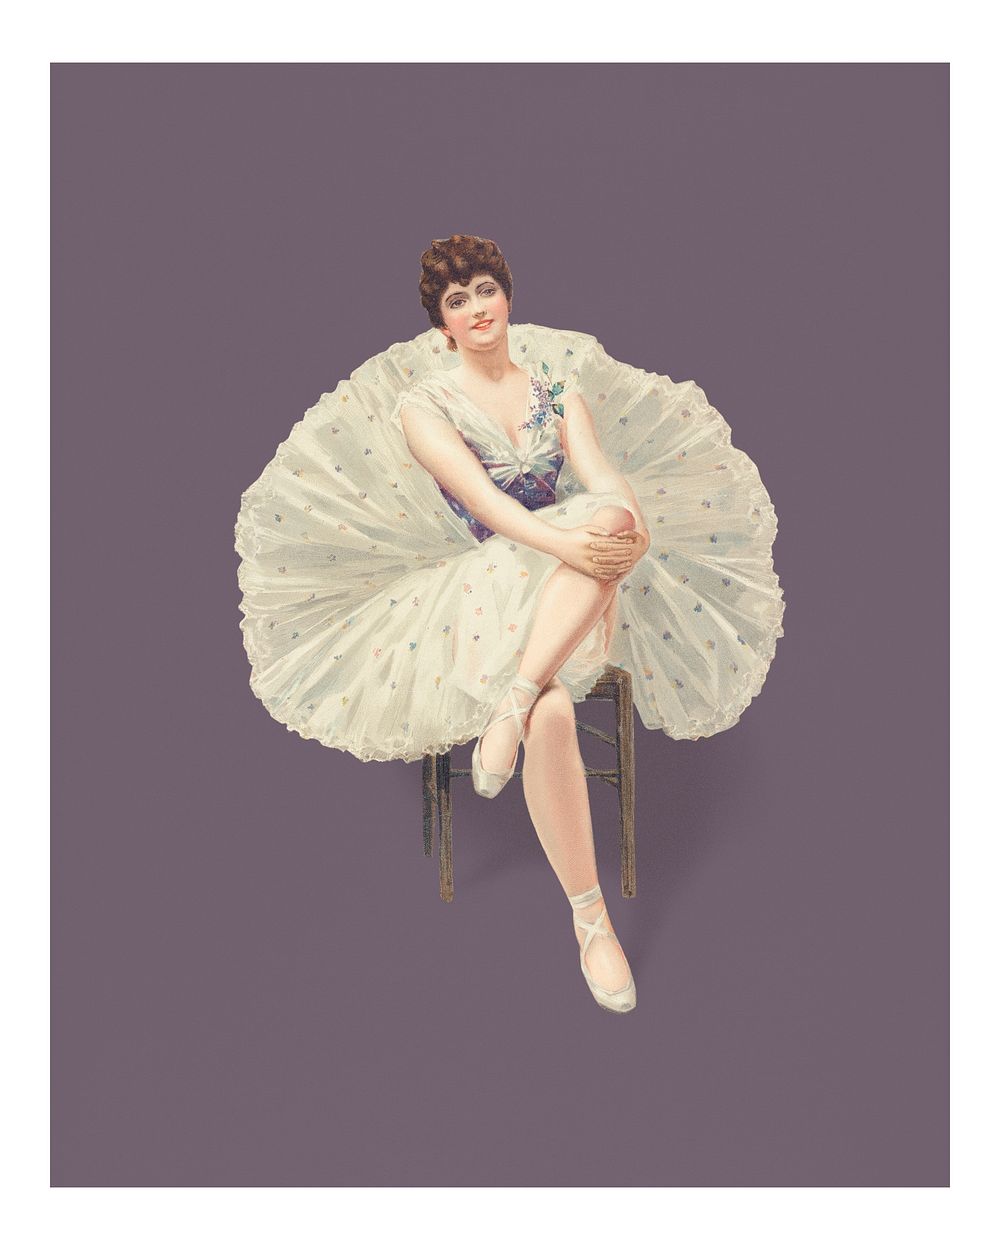 The belle of the ballet wall art print and poster, remix from the original artwork.